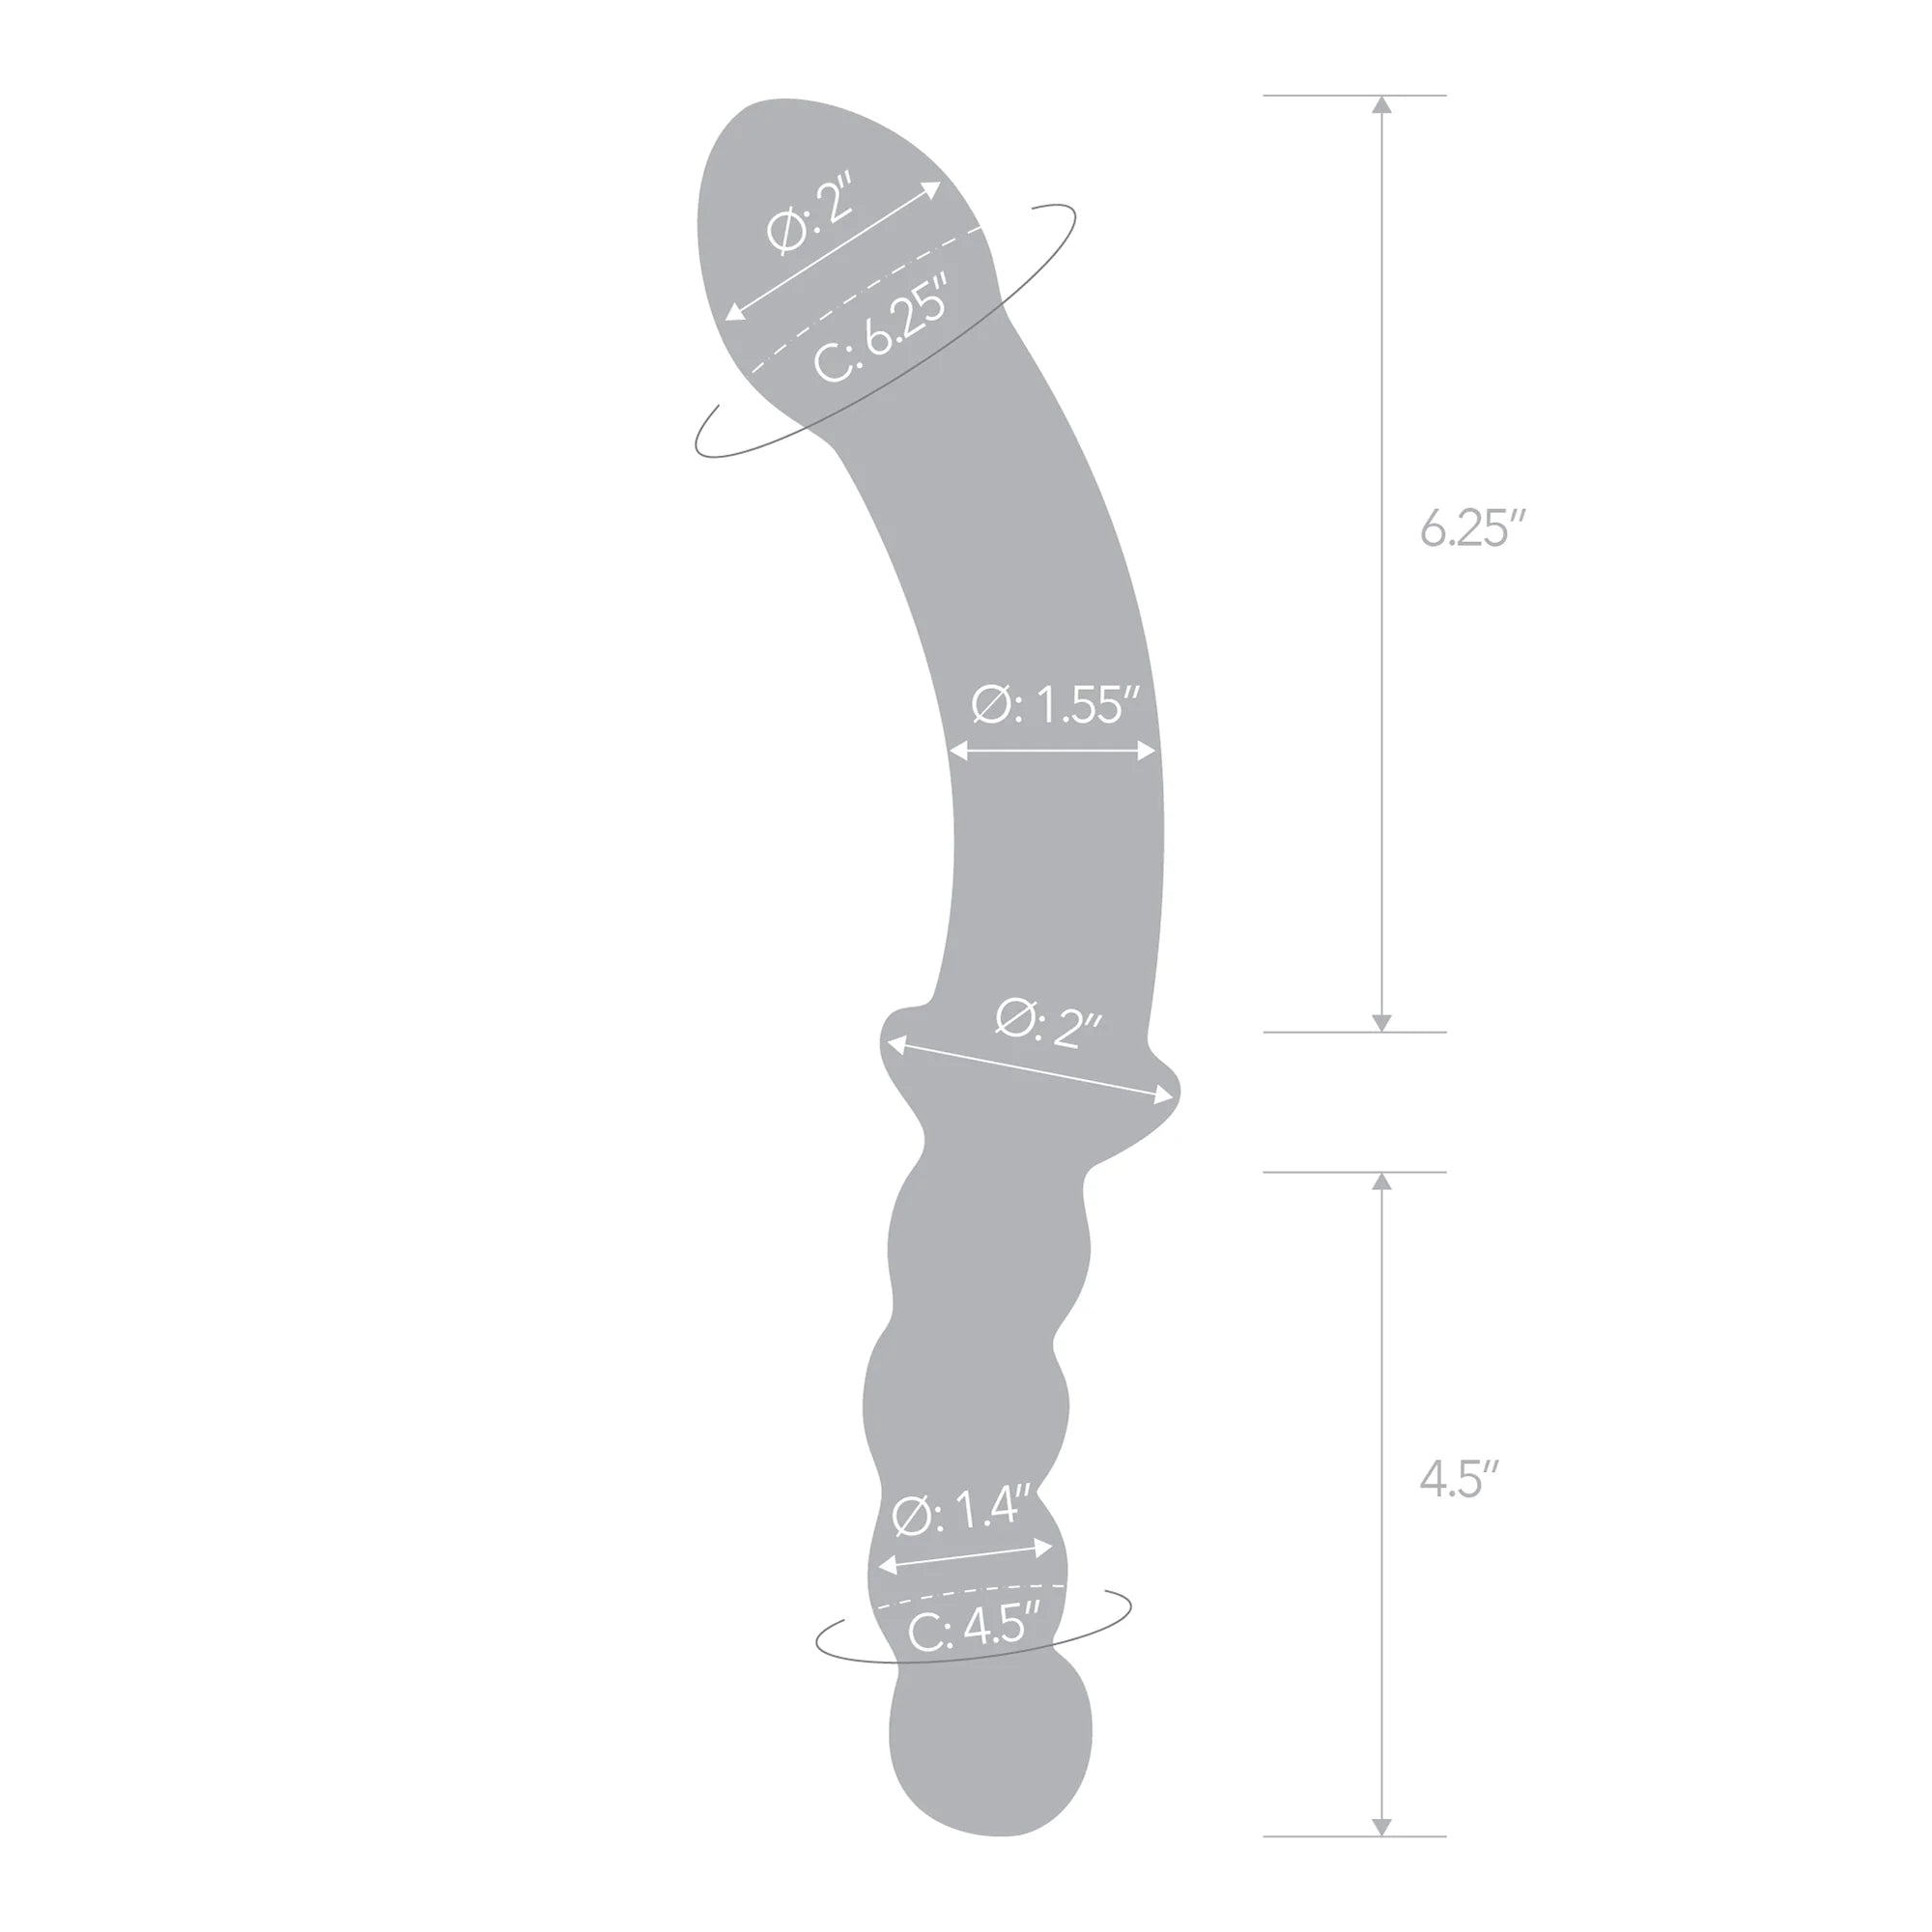 Gläs 12.5" Girthy Double Sided Dong With Anal Bead Grip Handle - Rolik®